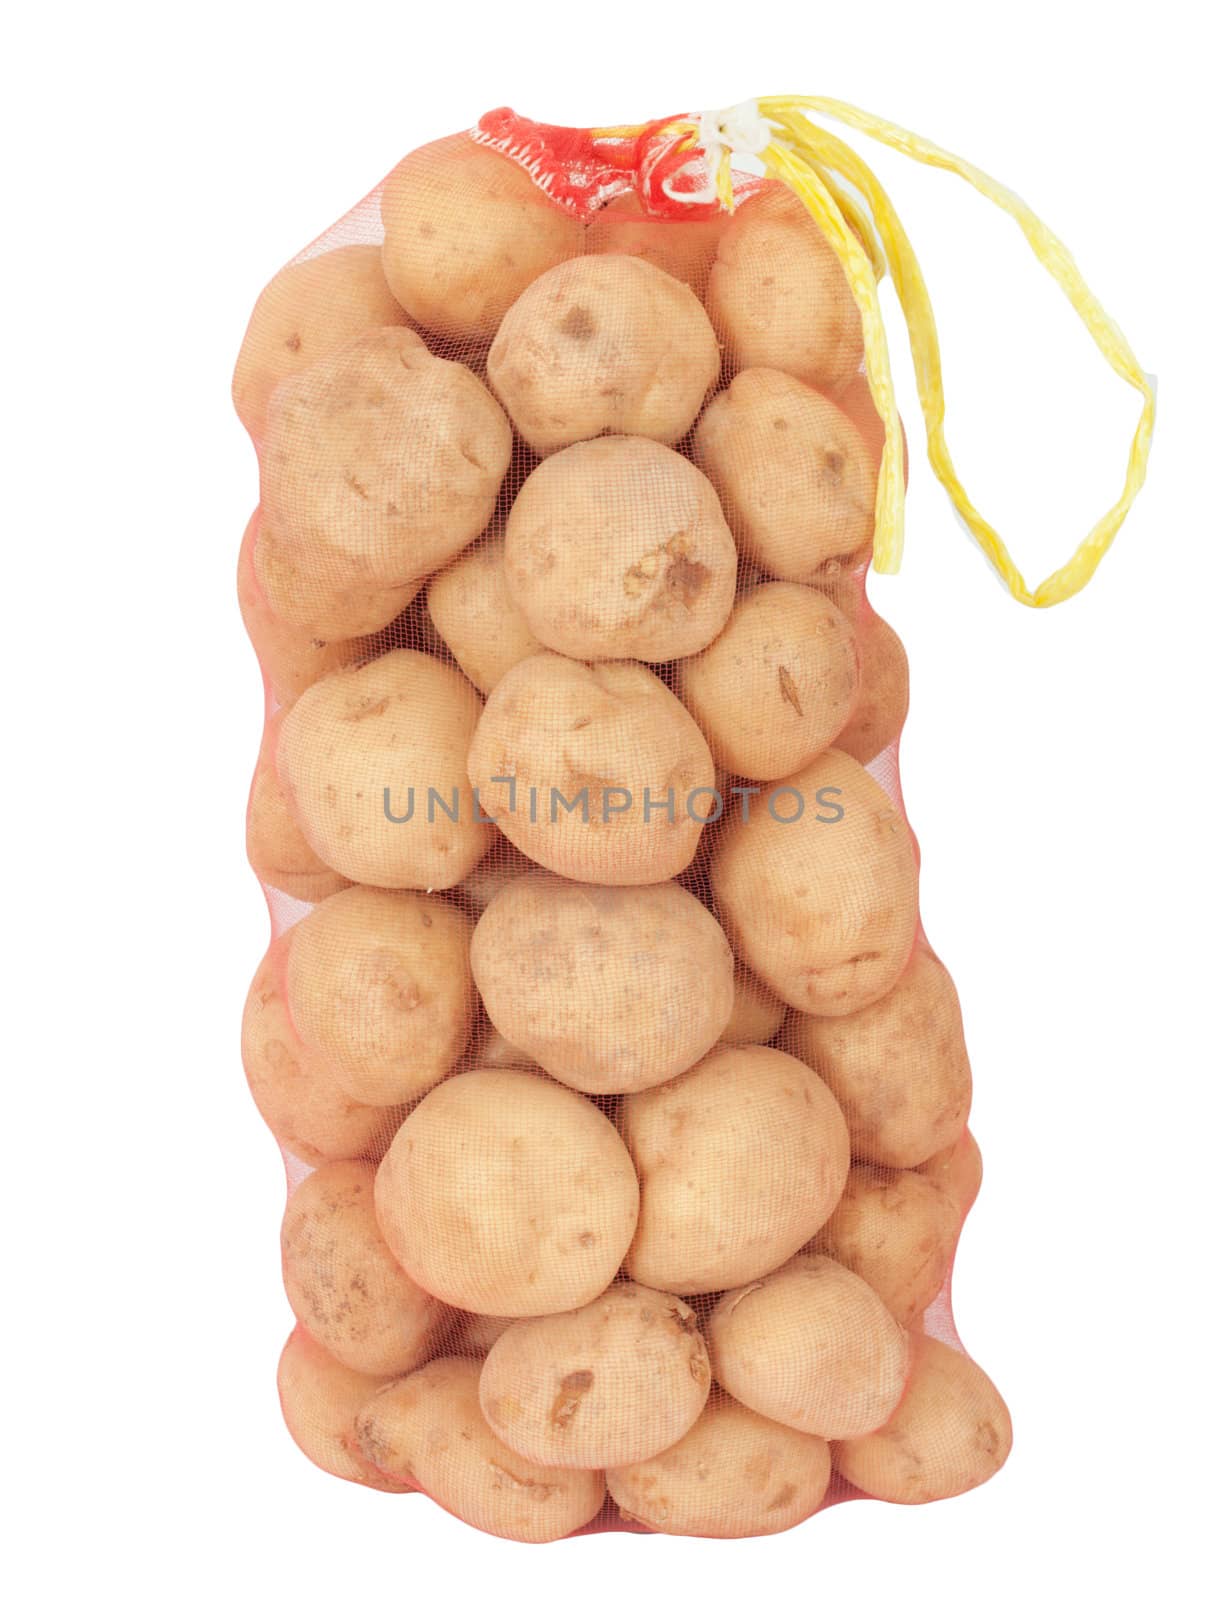 a sack of potatoes on a white background by schankz